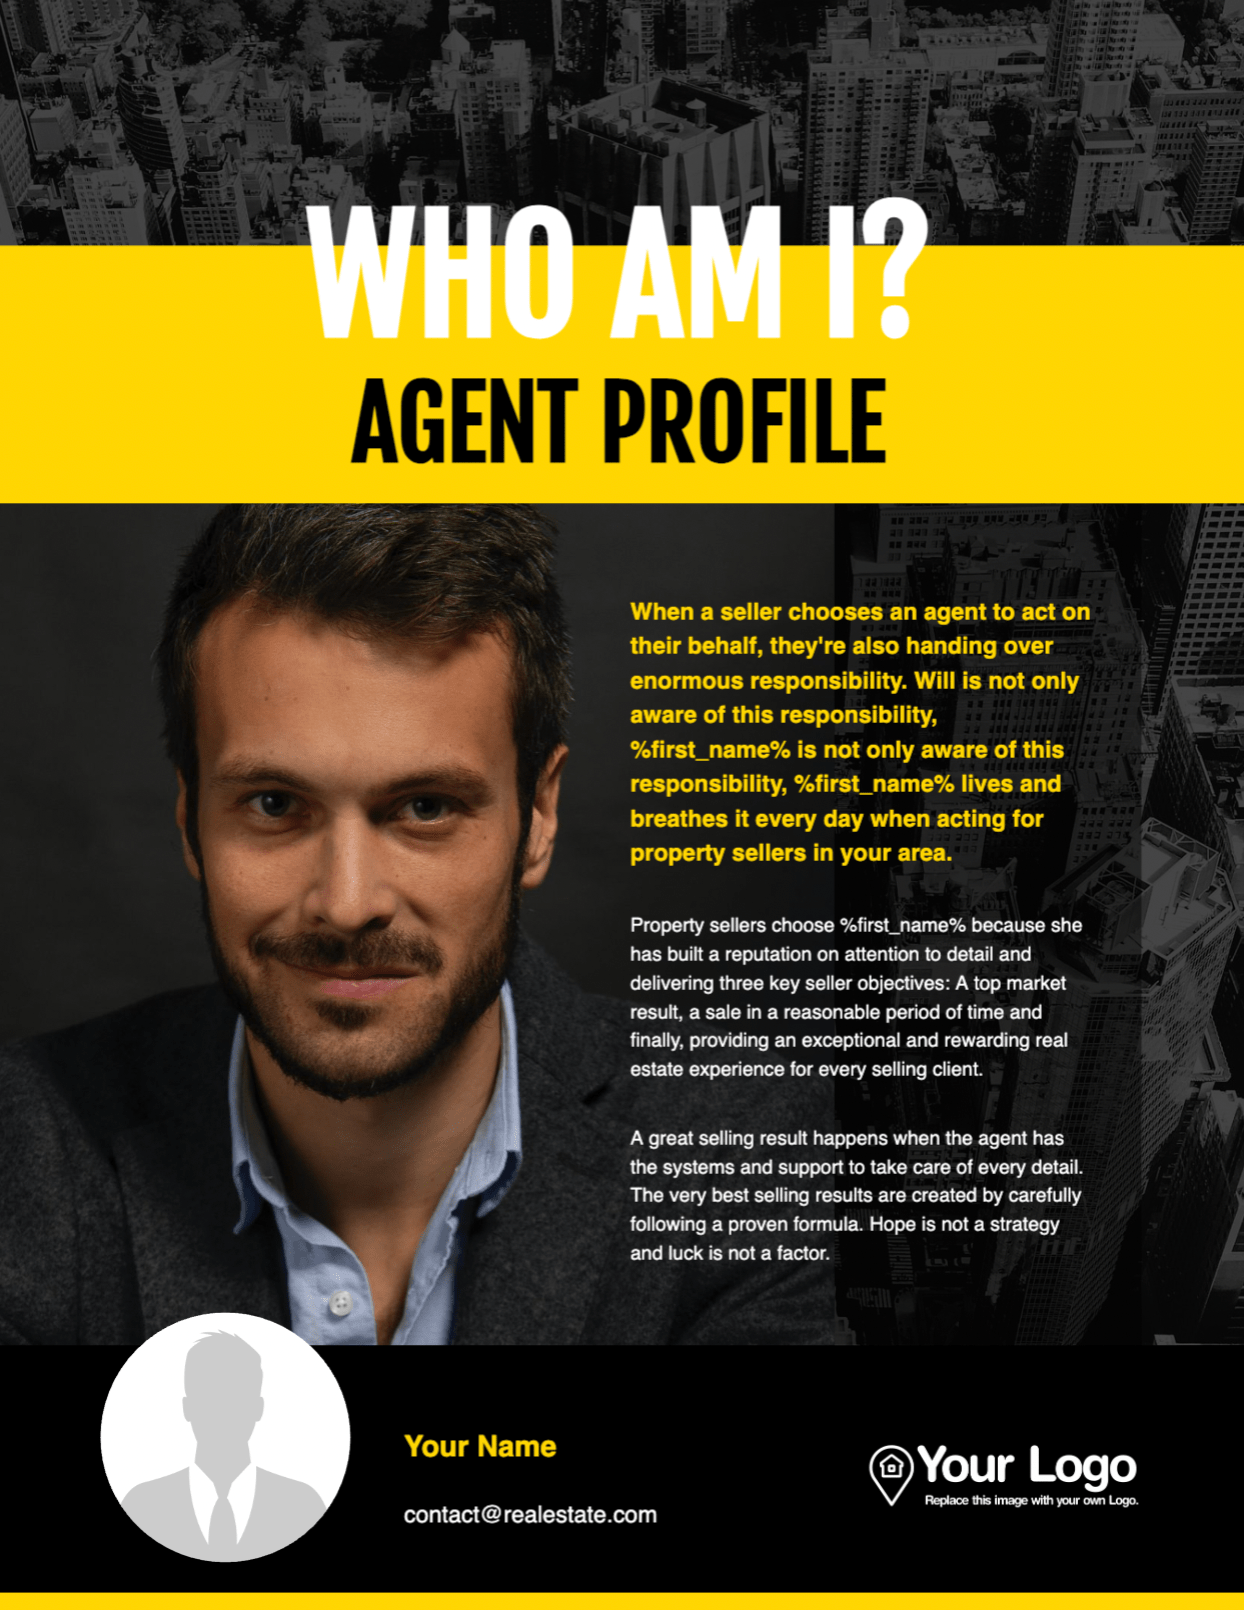 A real estate agent profile template in The Manhattan brand kit by Jigglar